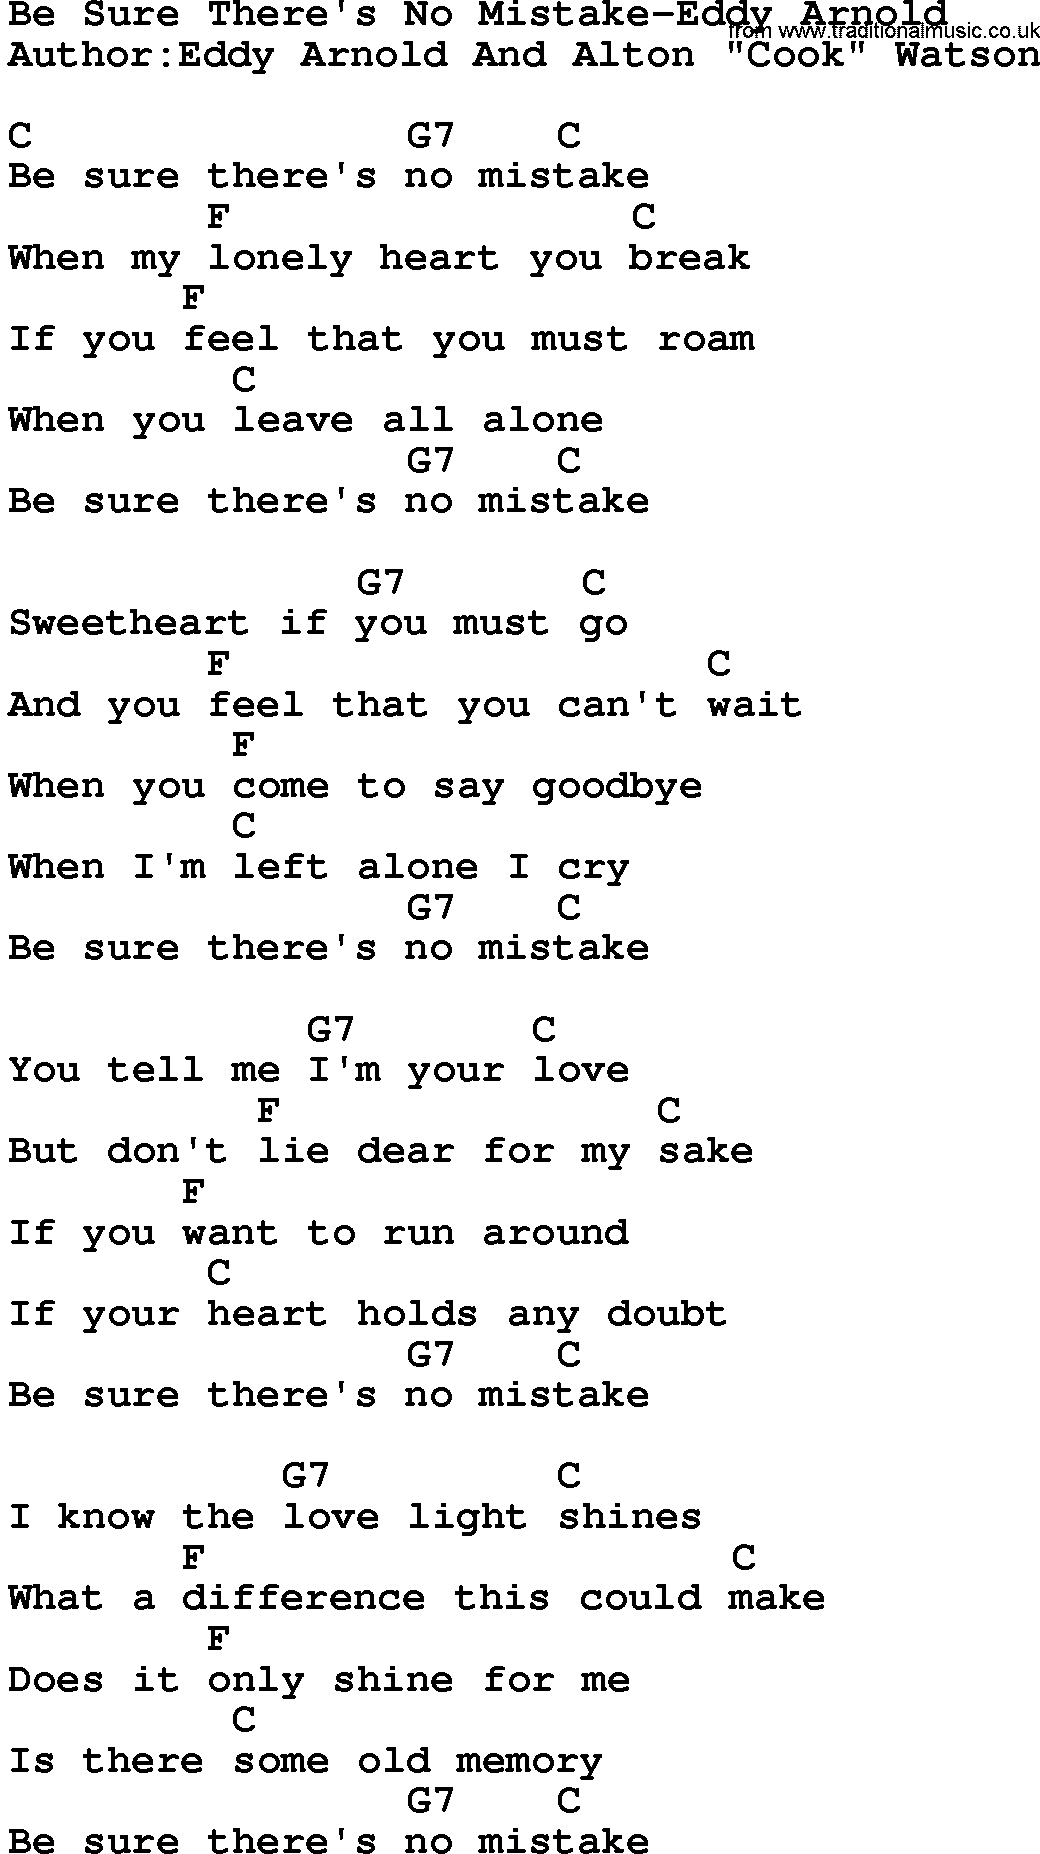 Country music song: Be Sure There's No Mistake-Eddy Arnold lyrics and chords